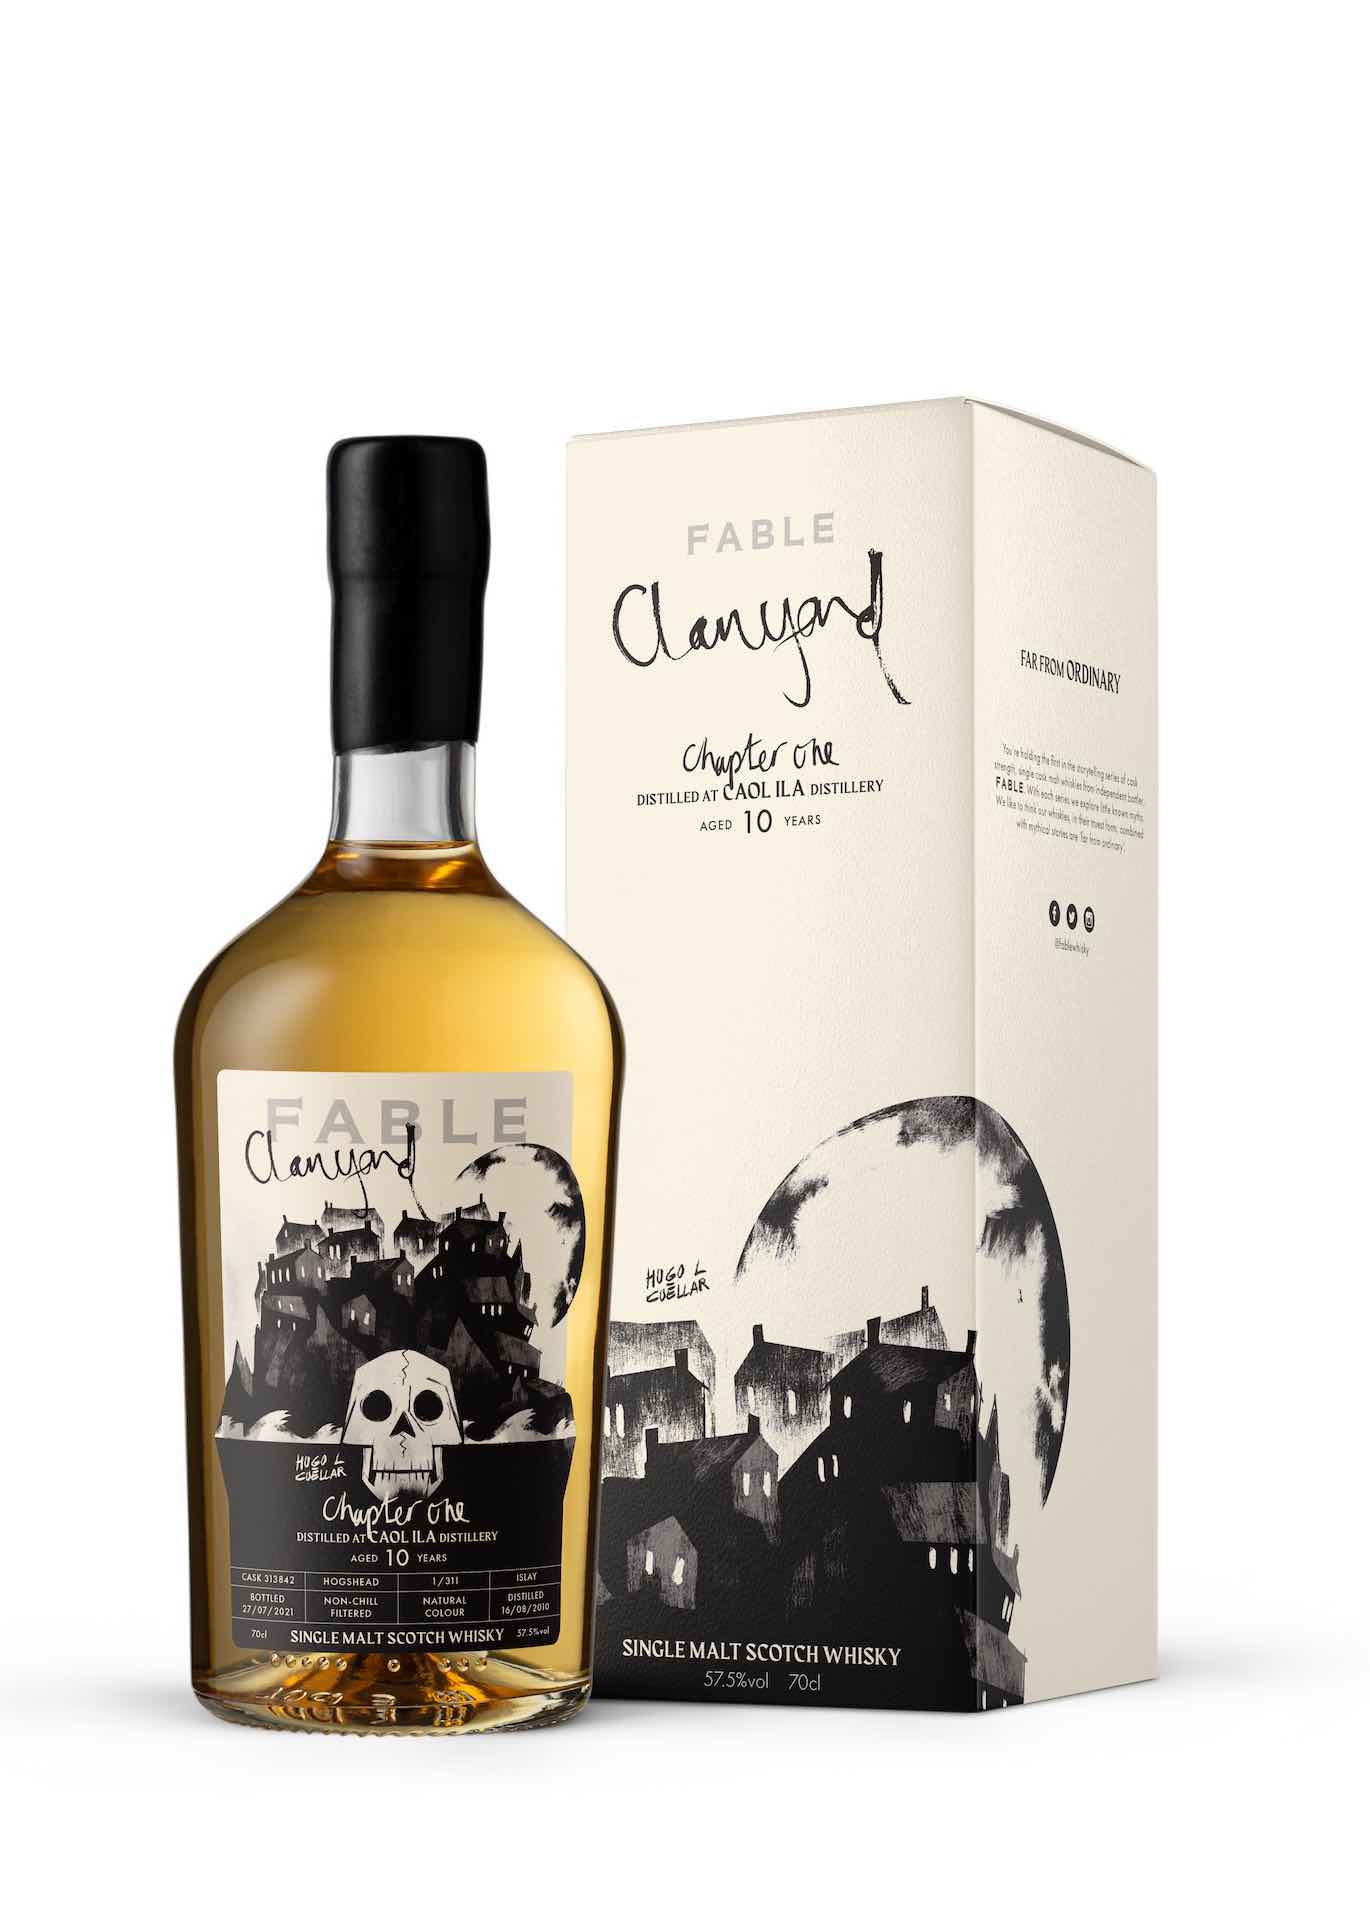 Fable Whisky Caol Ila 10 Chapter One Clanyard